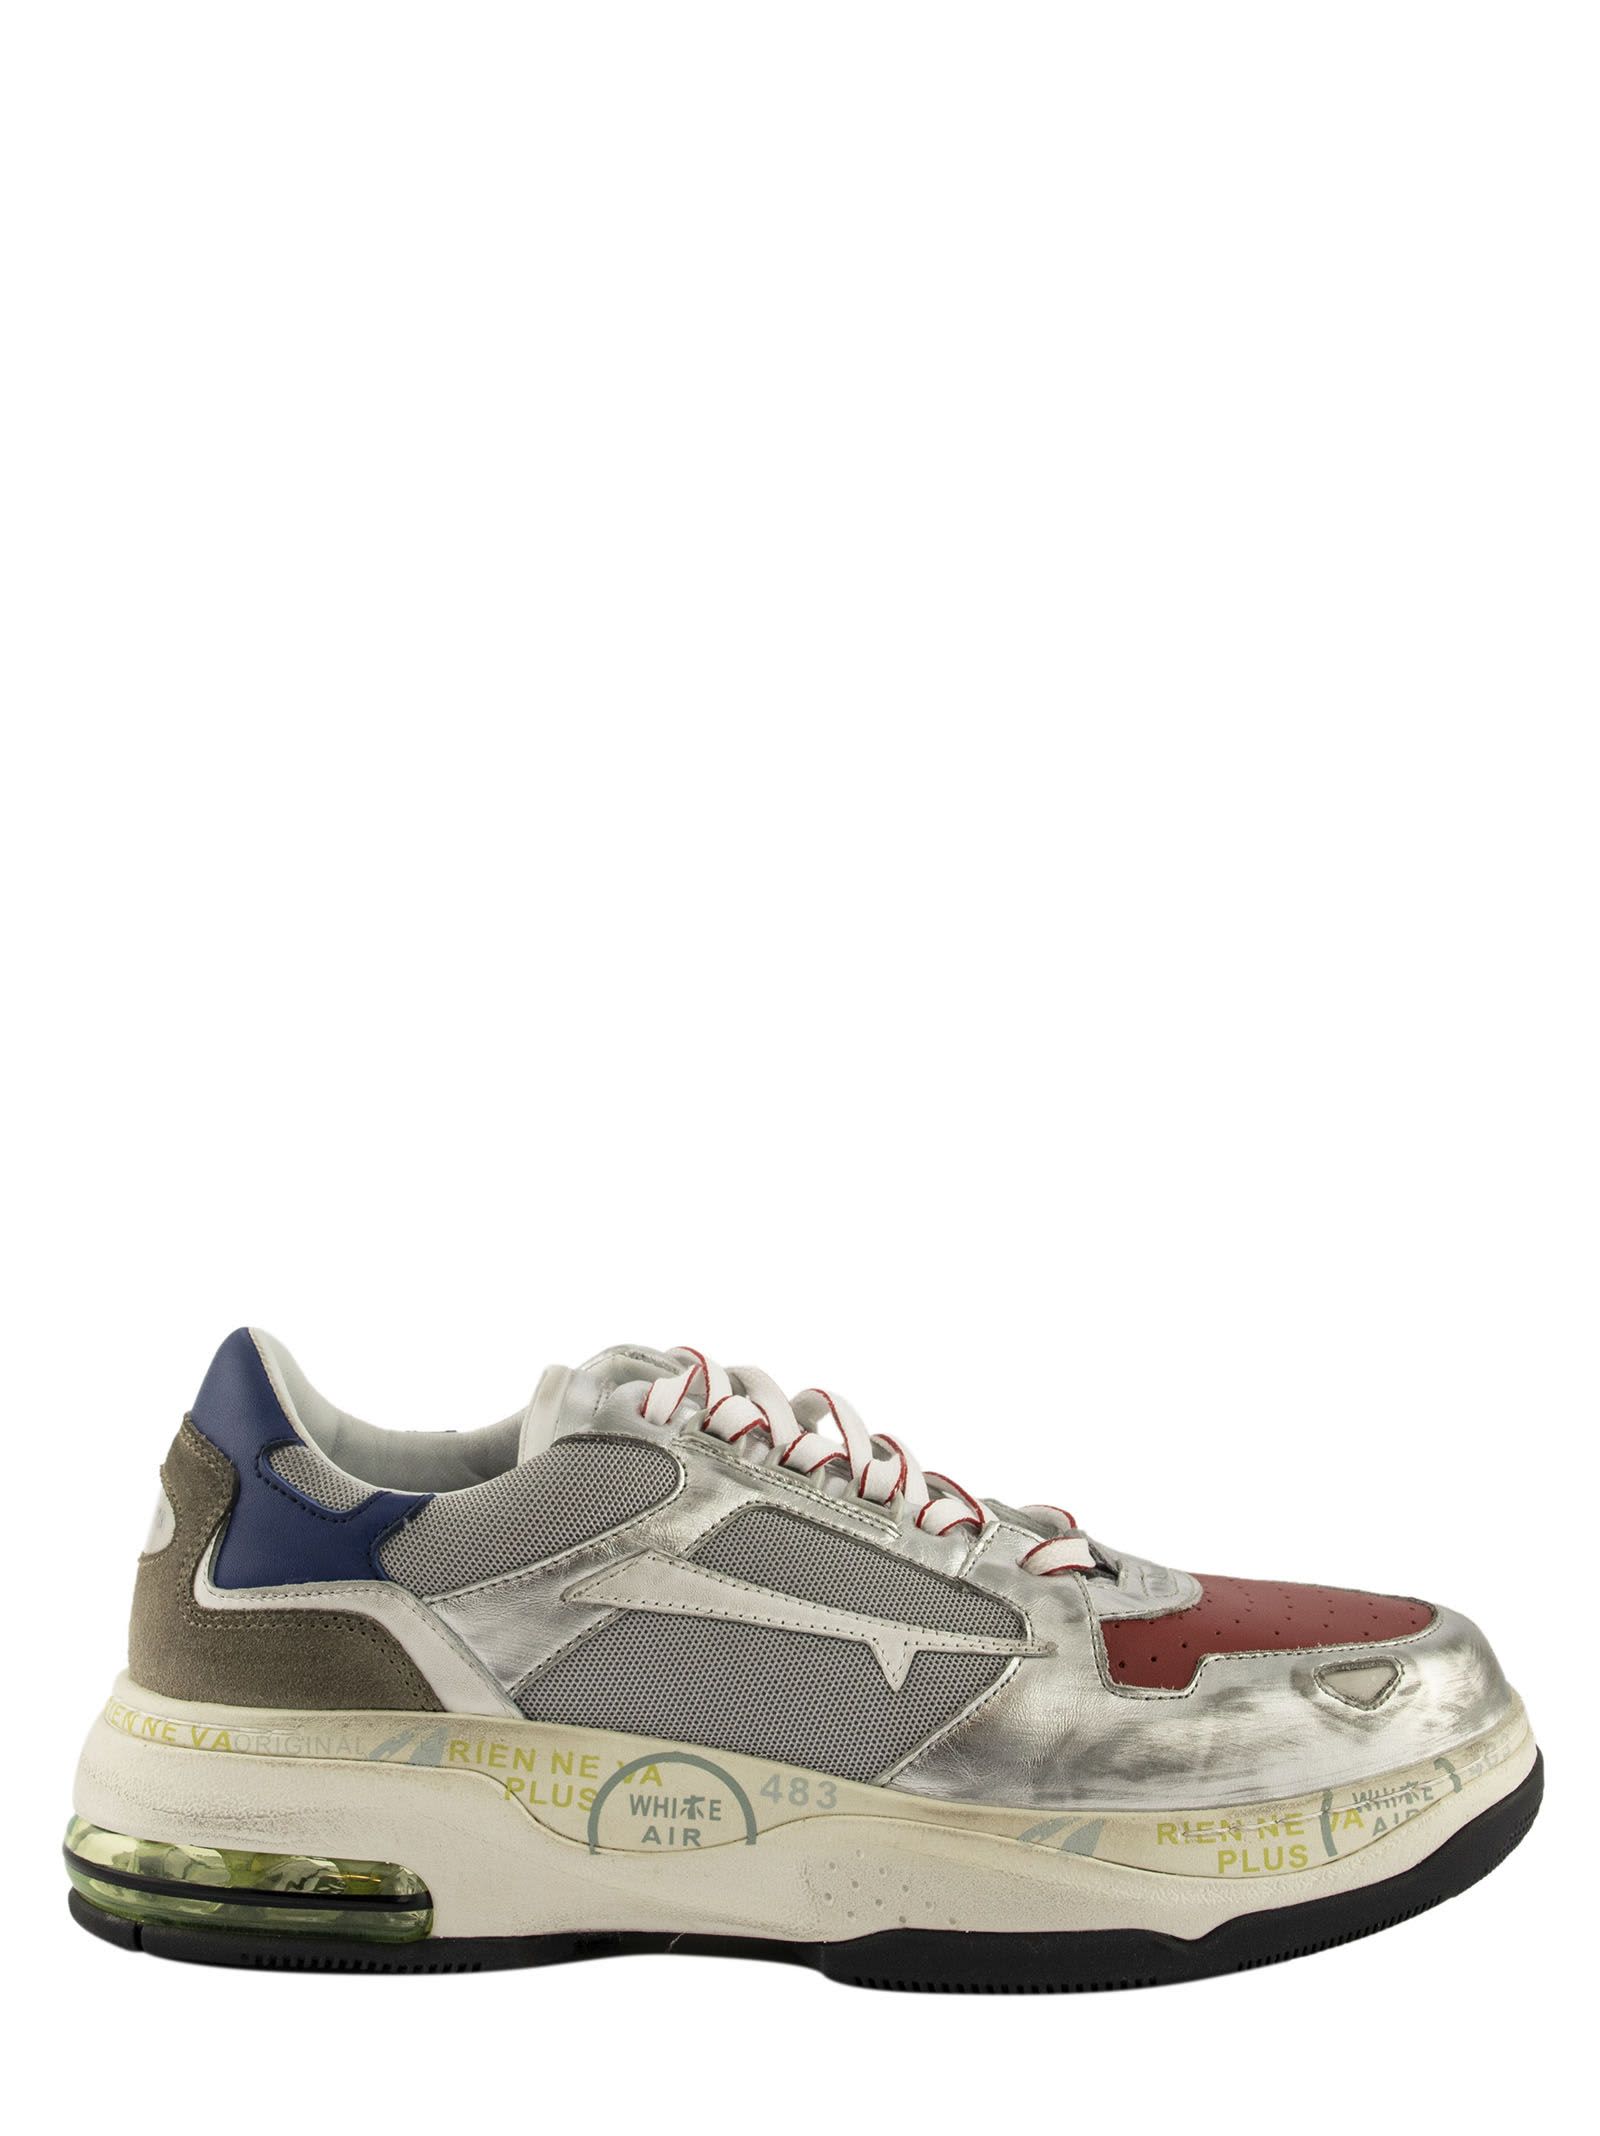 PREMIATA DRAKE 016 SNEAKERS SILVER AND RED,11219766